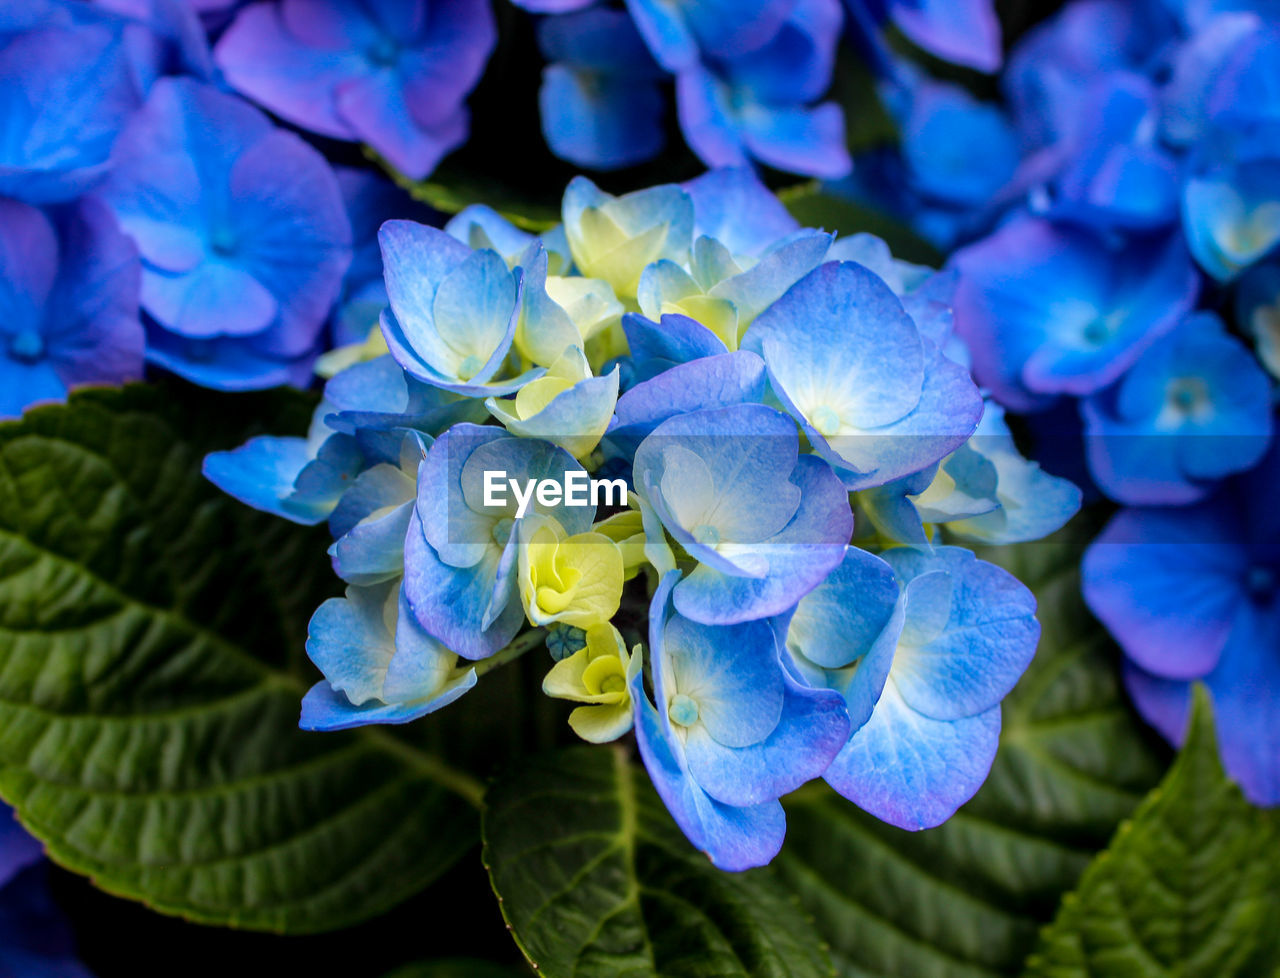 Close-up of blue hydrangeas blooming outdoors